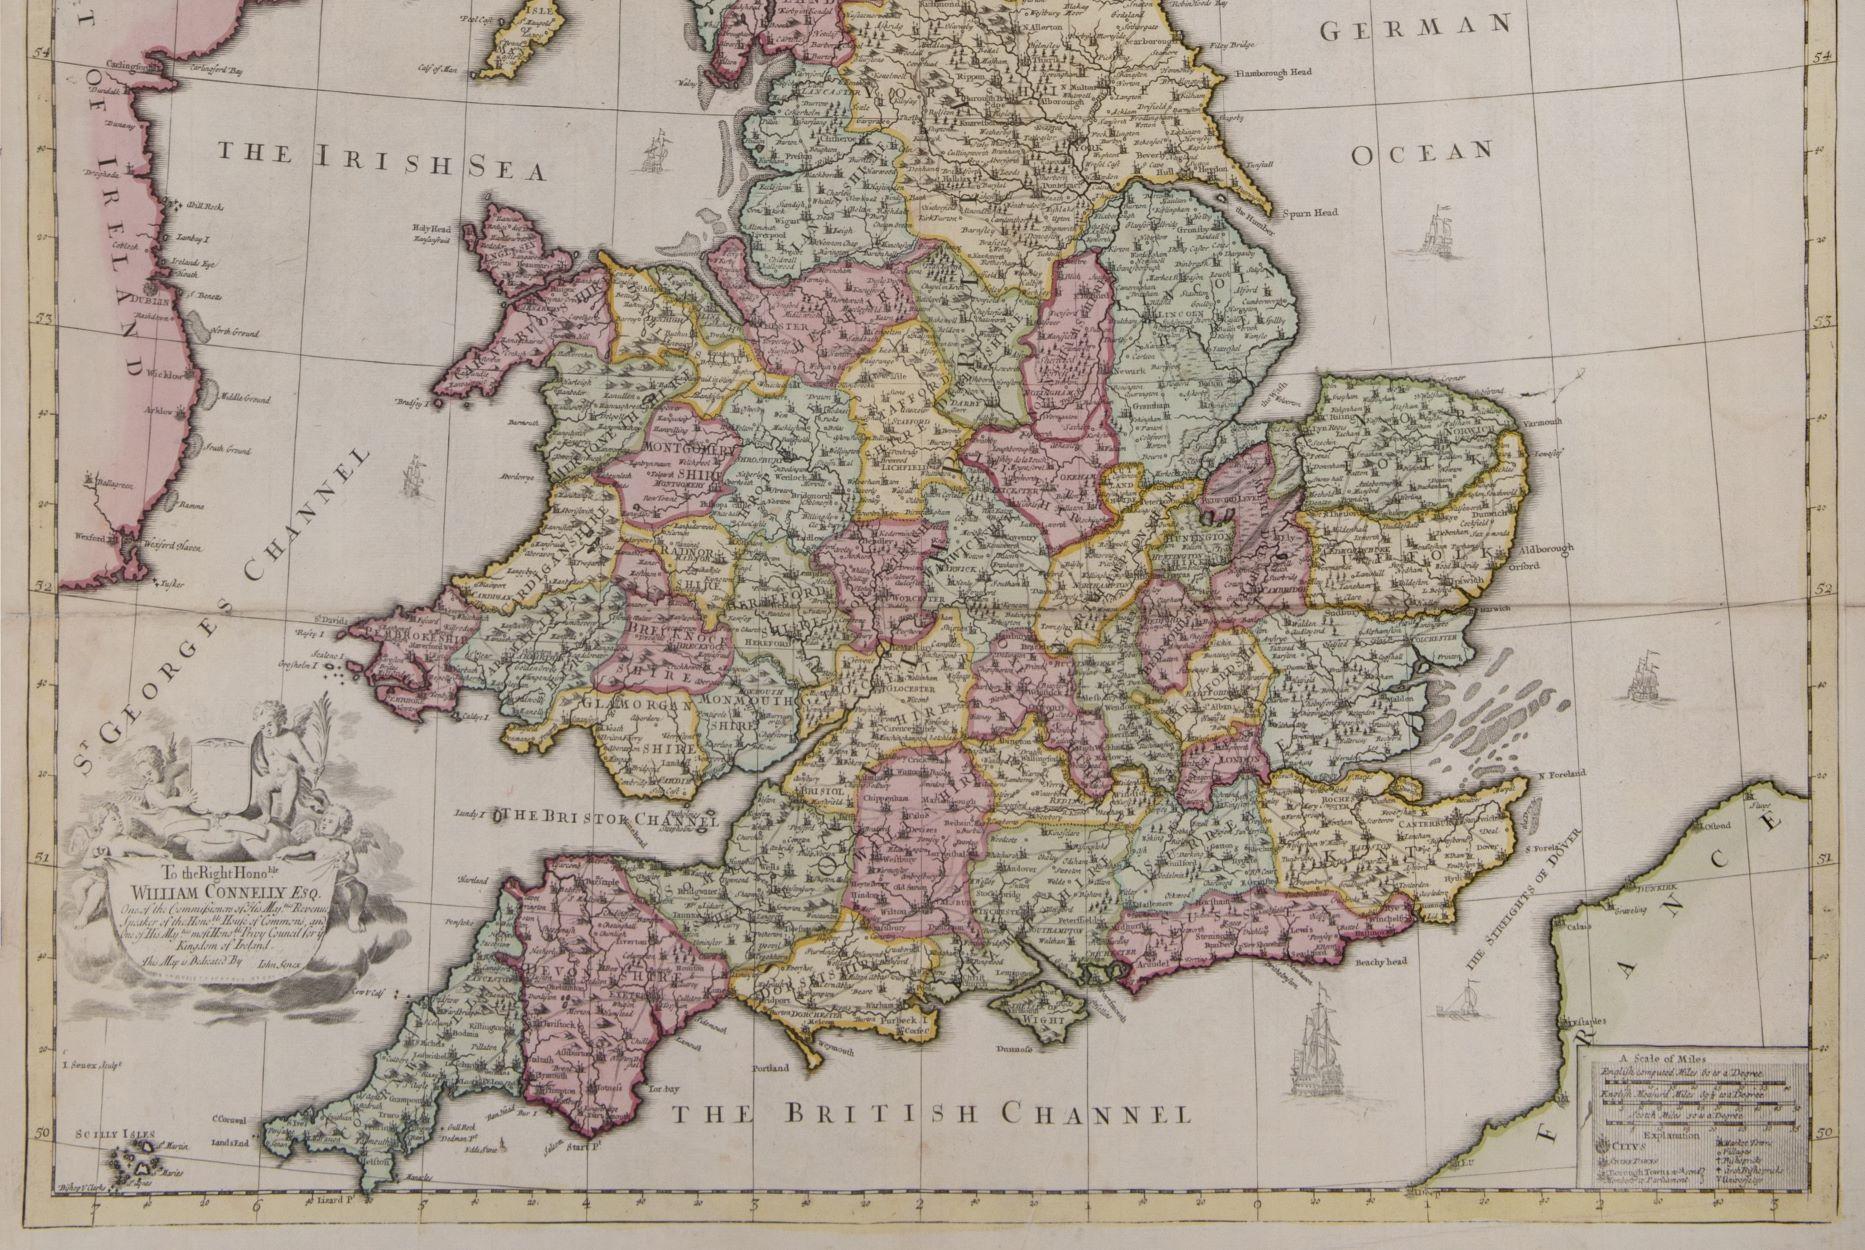 Great Britain
SENEX, John.
A New Map of Great Britain Corrected from the Observations communicated to the Royal Society at London. By John Senex F.R.S. To the Right Hono[ra]ble William Connelly ESQ. One of the Commissioners of His Maj[es]ties